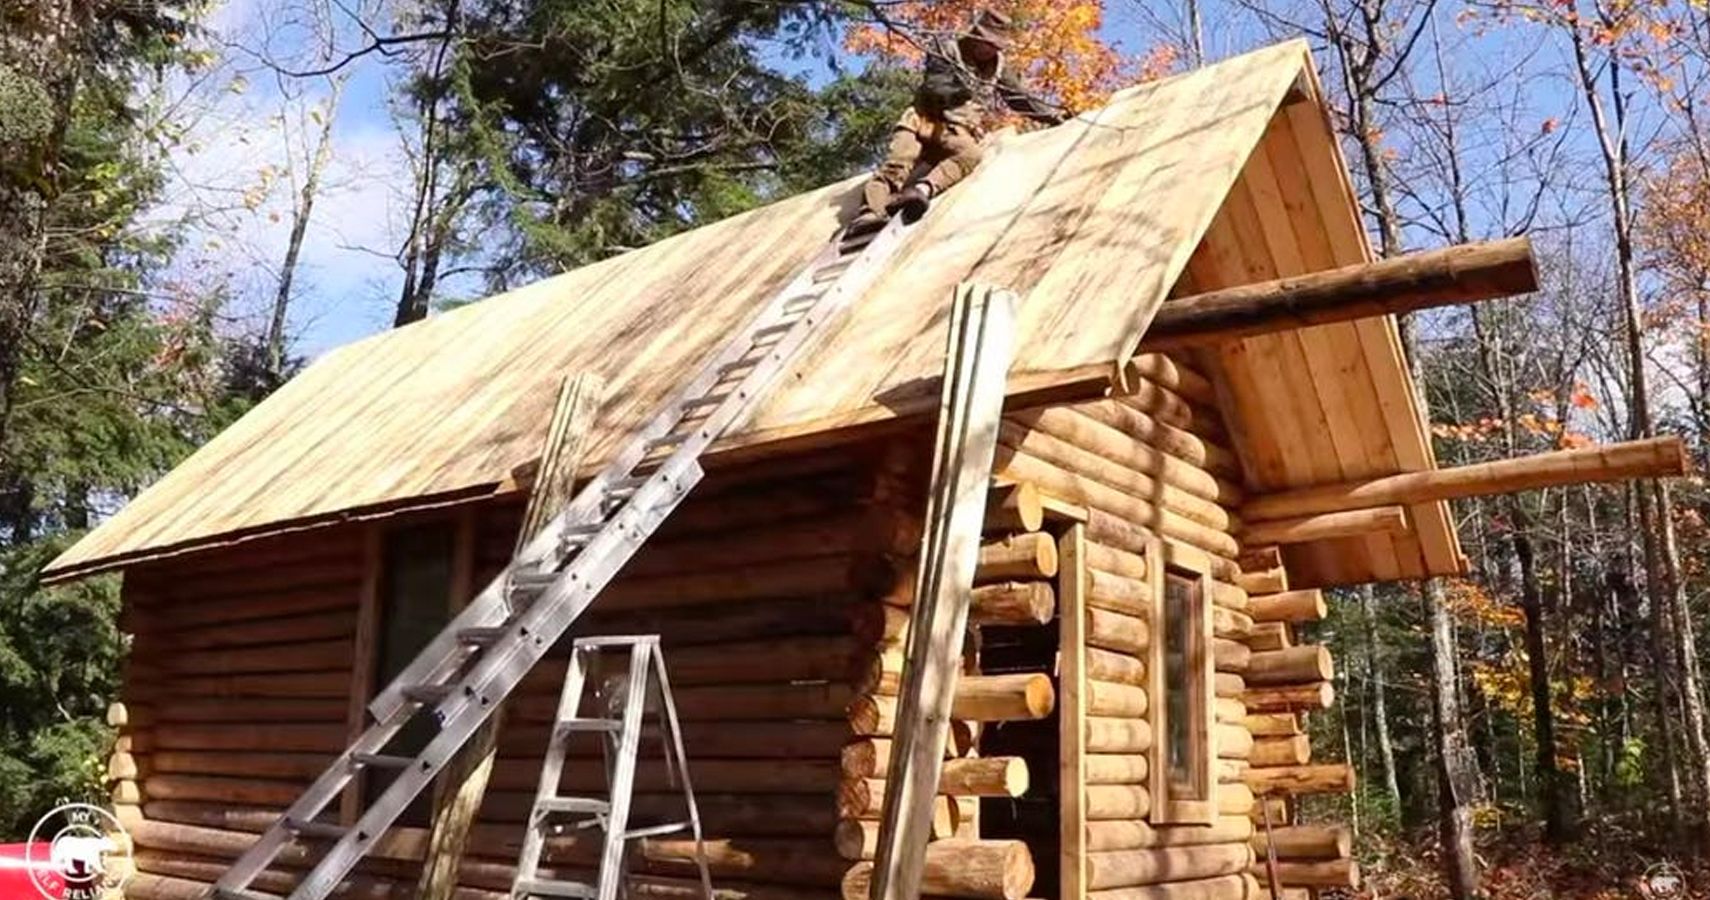 Watch This: Time-Lapse Of Man Building Log Cabin On His ...